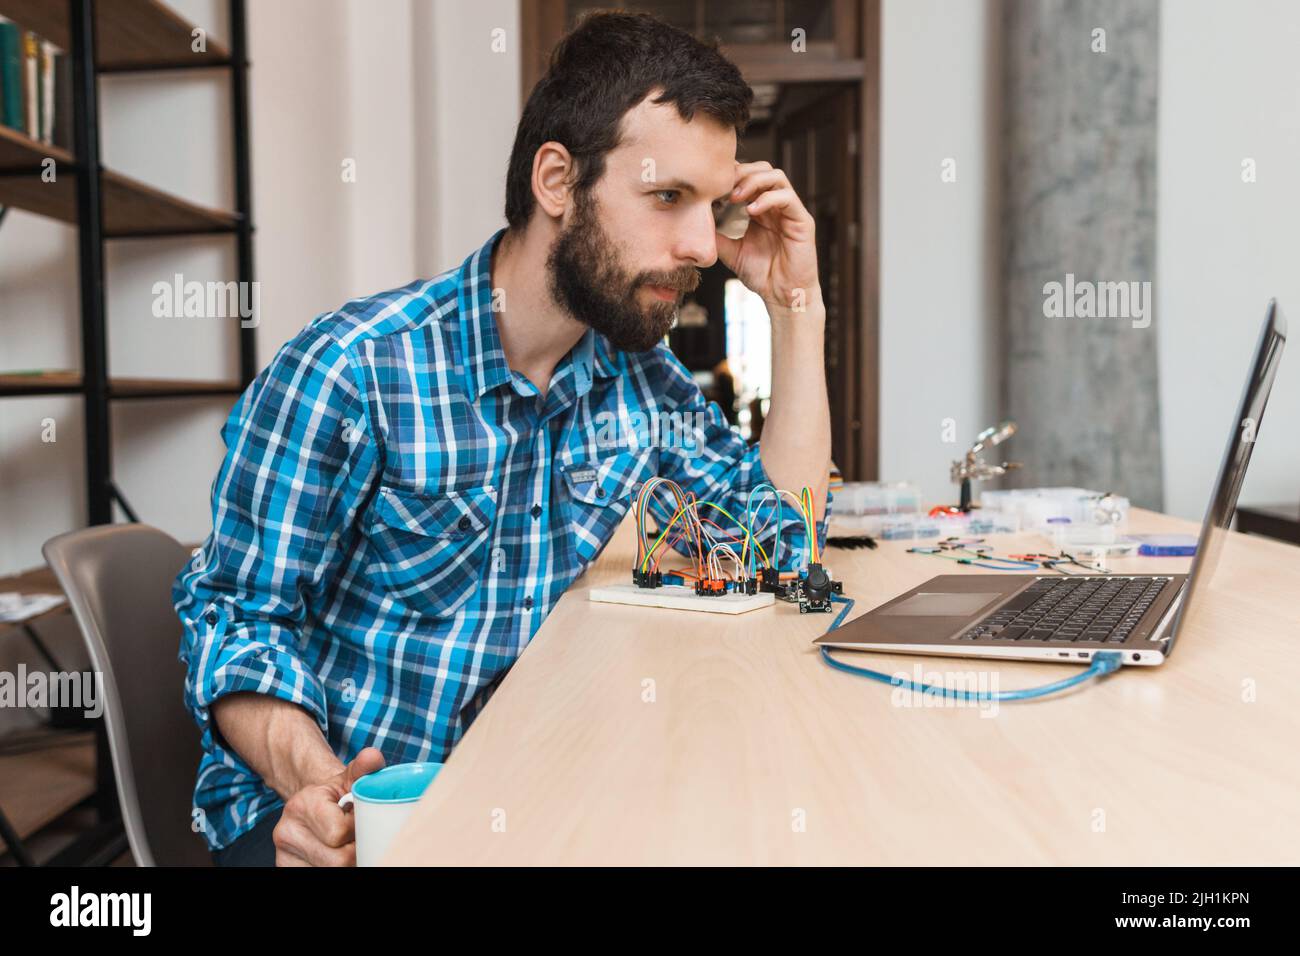 Bearded engineer waiting for program download Stock Photo